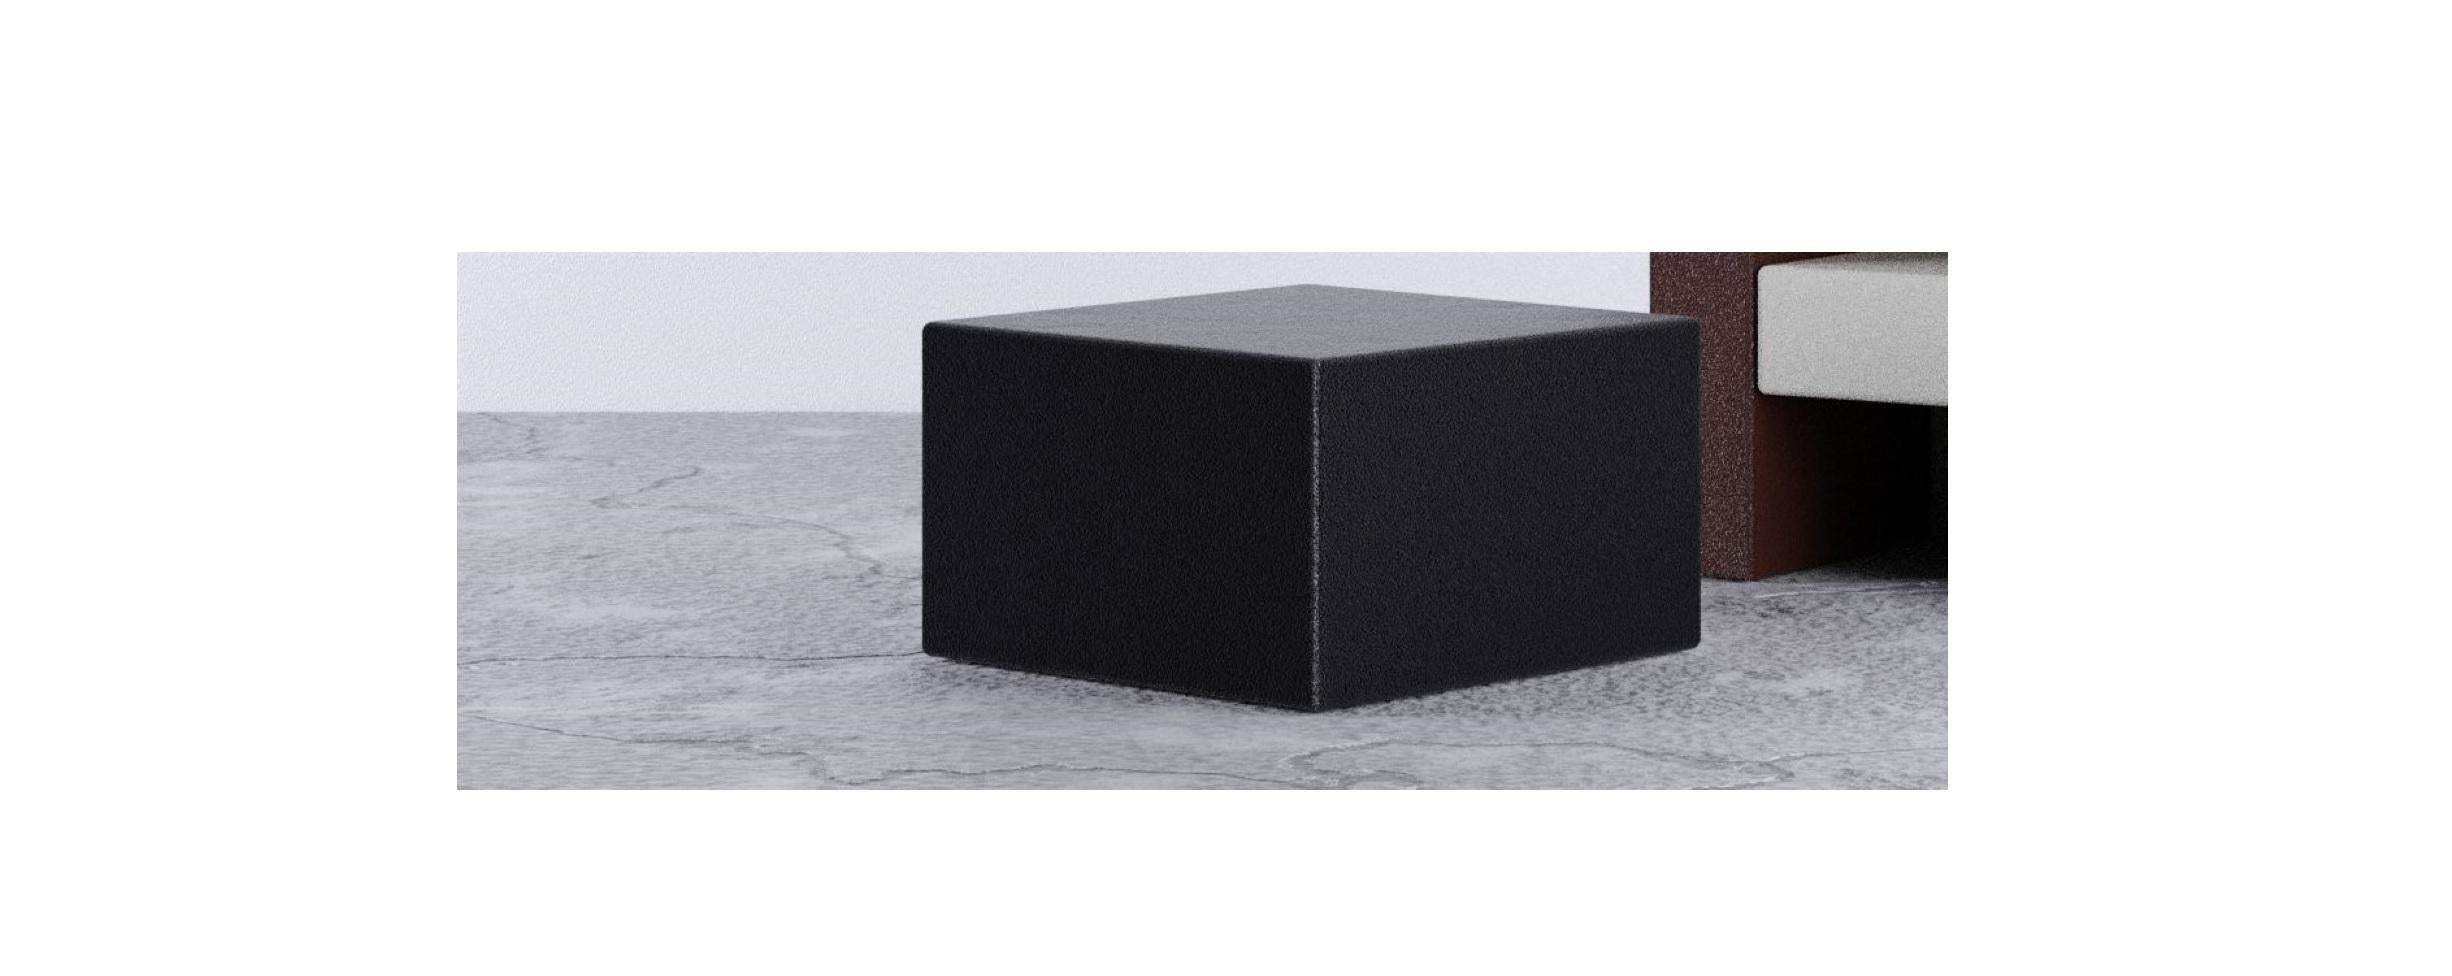 Carpet matter block side table by Riccardo Cenedella
Dimensions: 50 x 50 x H 30 cm
Materials: Waste synthetic carpet, wood structure.

I am Riccardo Cenedella I graduated in Product Design from Politecnico di Torino in 2016 and straight after my